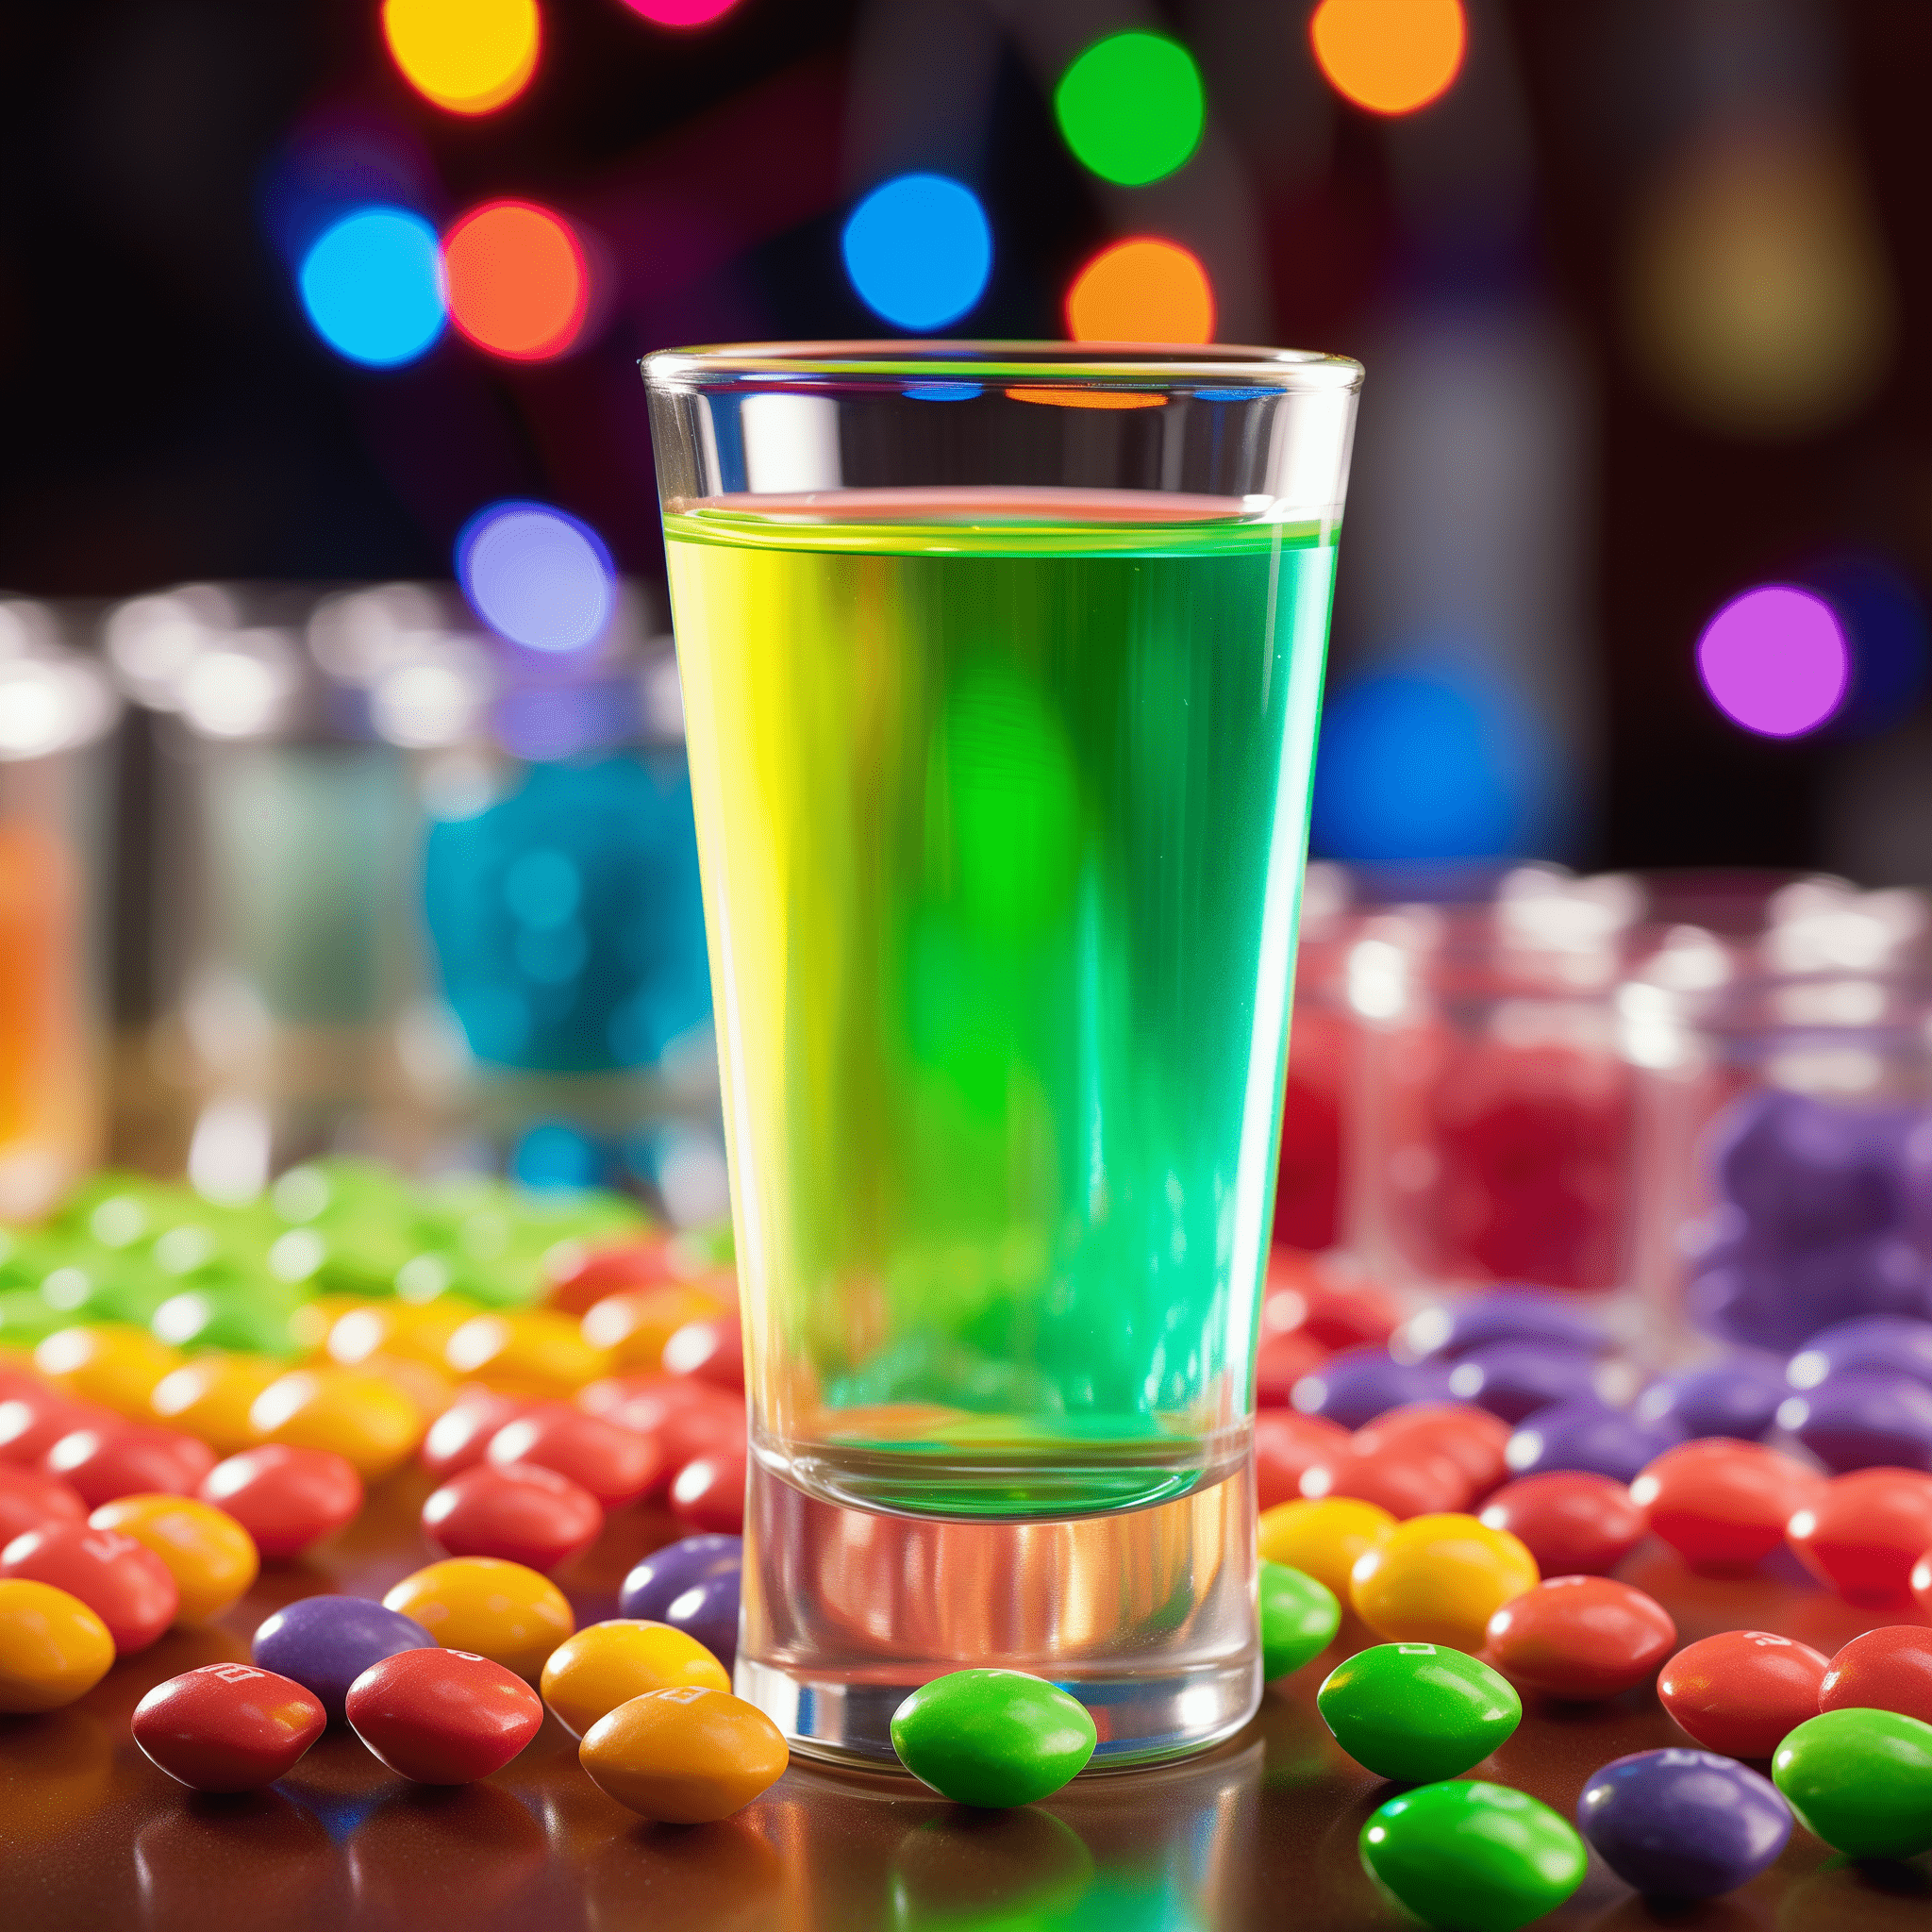 Skittles Shot Recipe - The Skittles Shot is a delightful mix of sweet and tangy flavors, reminiscent of the candy it's named after. It's a vibrant, fruity concoction with a slight sour kick from the sweet and sour mix, balanced by the tropical notes of pineapple juice.